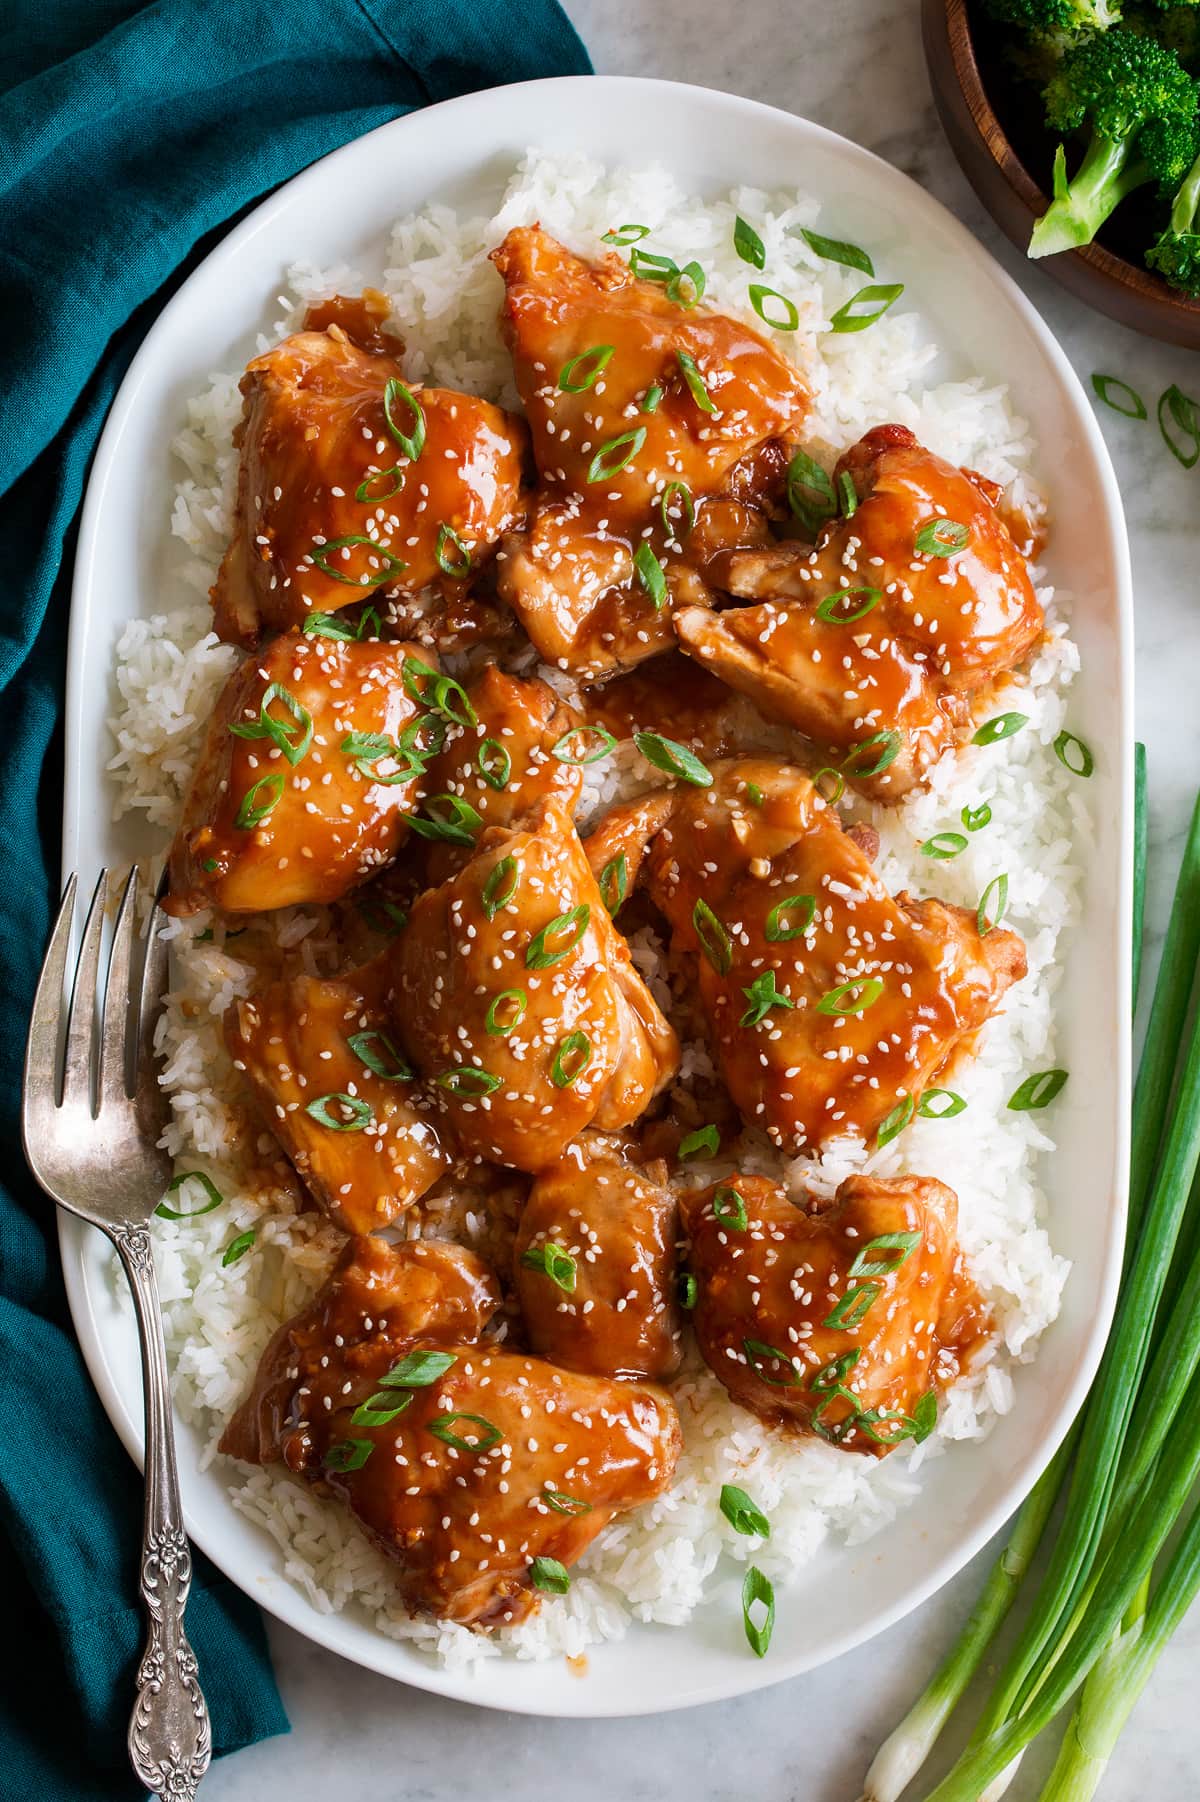 Slow cooker chicken thighs with sauce shown served over white rice on a white oval platter. Platter is on a marble surface with a blue cloth and green onions to the side.